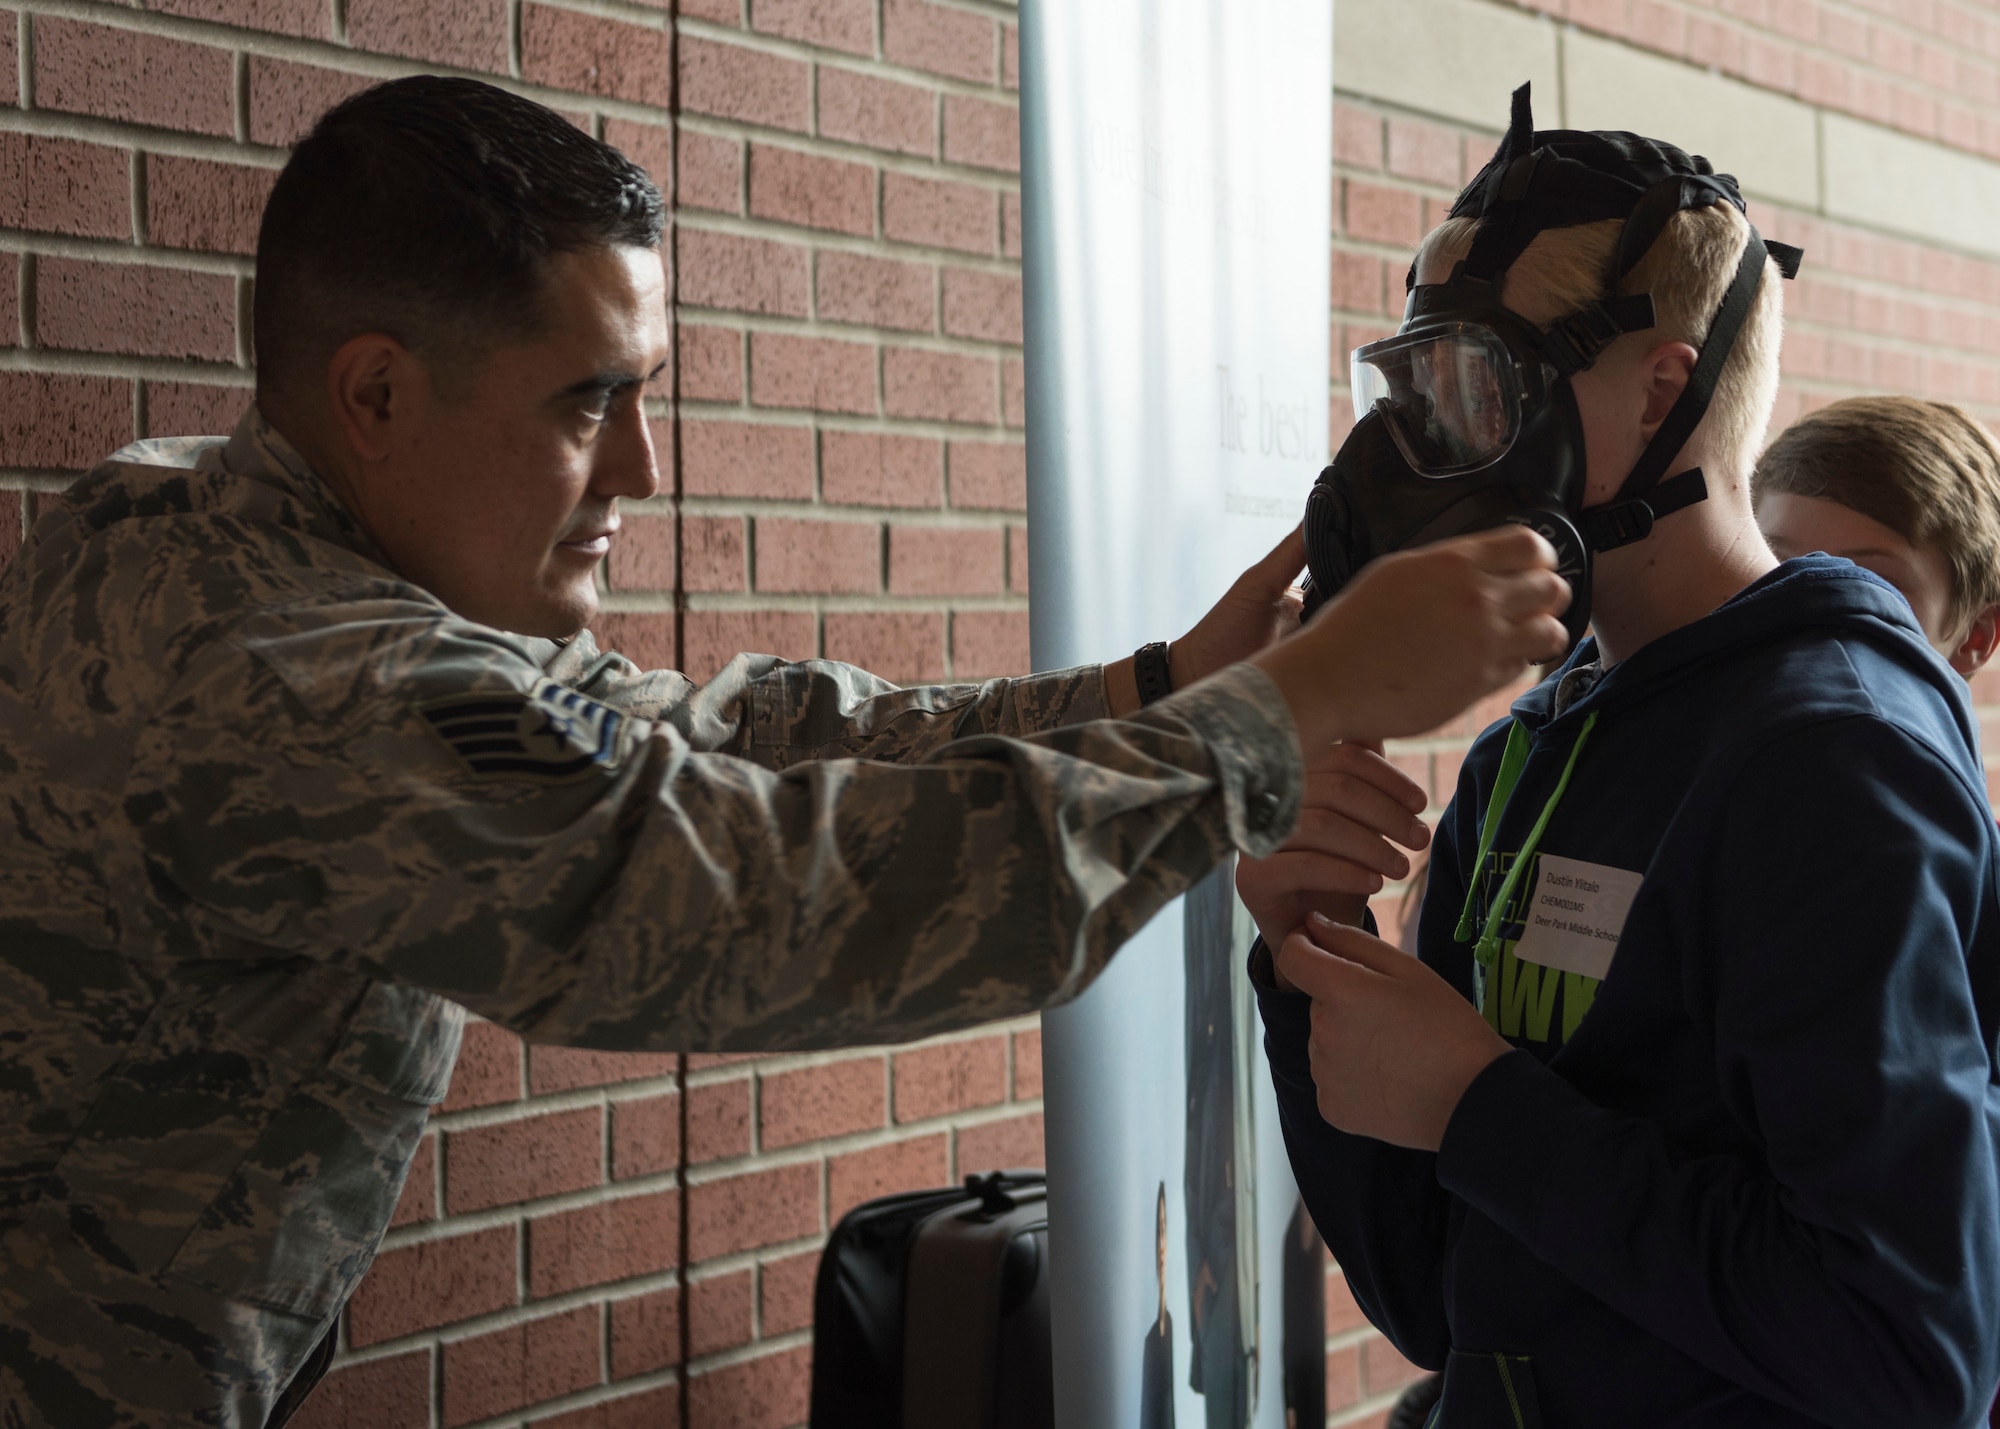 Staff Sgt. Gerardo Salas, 92nd Medical Group Bioenvironmental engineer, helps Dustin Ylitalo, Deer Park Middle School student, with a M50 gas mask at an informational booth during the  Eastern Washington Regional Science and Engineering Fair at the Spokane Washington State University campus, Washington, March 15, 2018. Members of Team Fairchild attended the fair to provide visiting students with information about the science, technology, engineering and math related fields that the U.S. Air Force offers. (U.S. Air Force photo/Senior Airman Ryan Lackey)